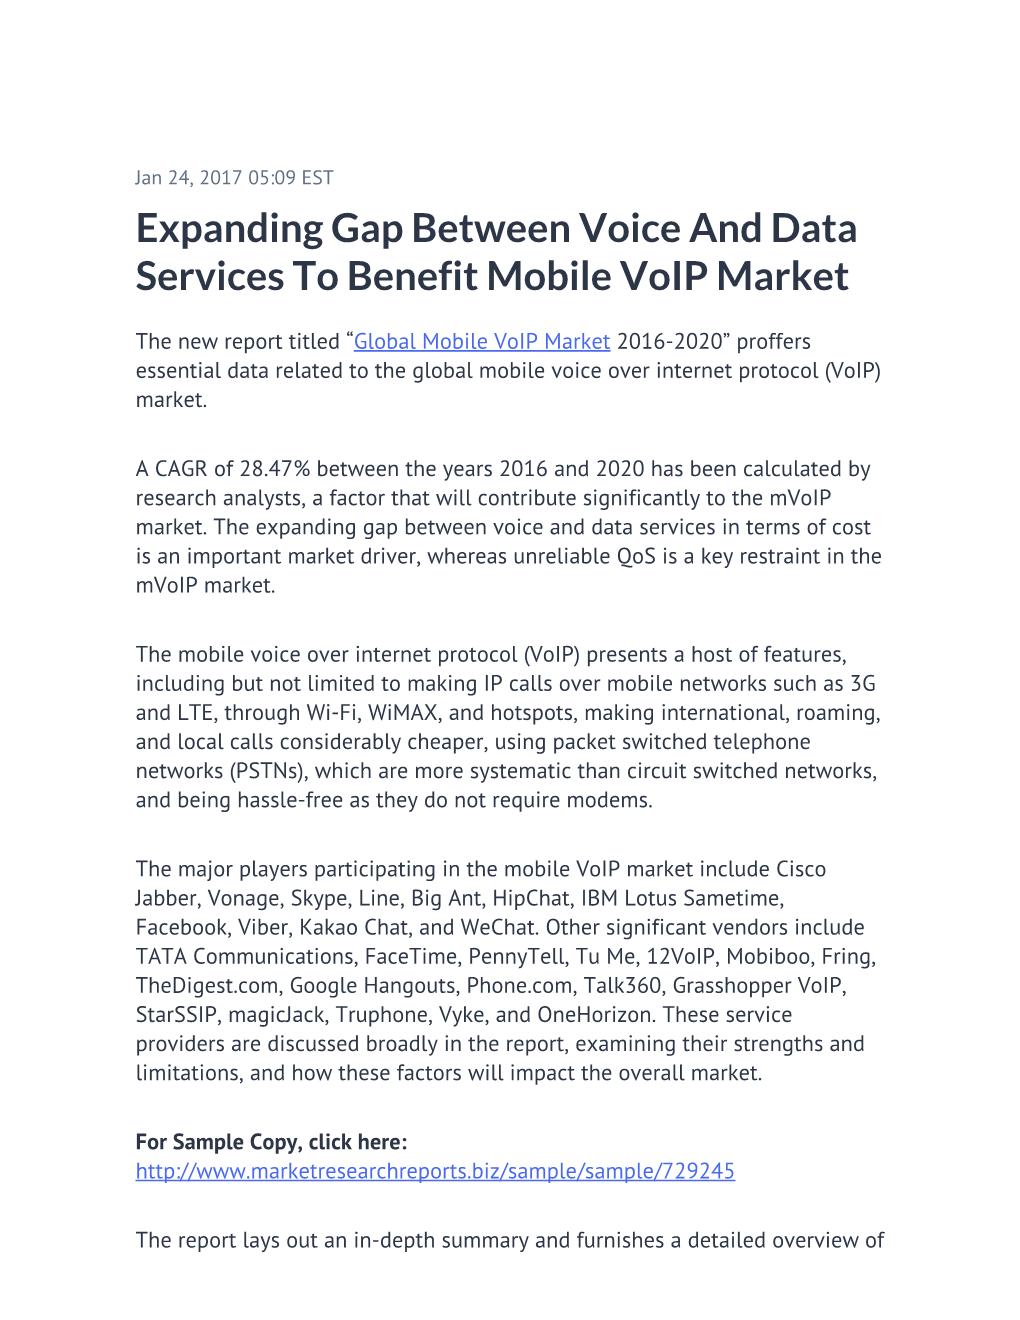 Expanding Gap Between Voice and Data Services to Benefit Mobile Voip Market